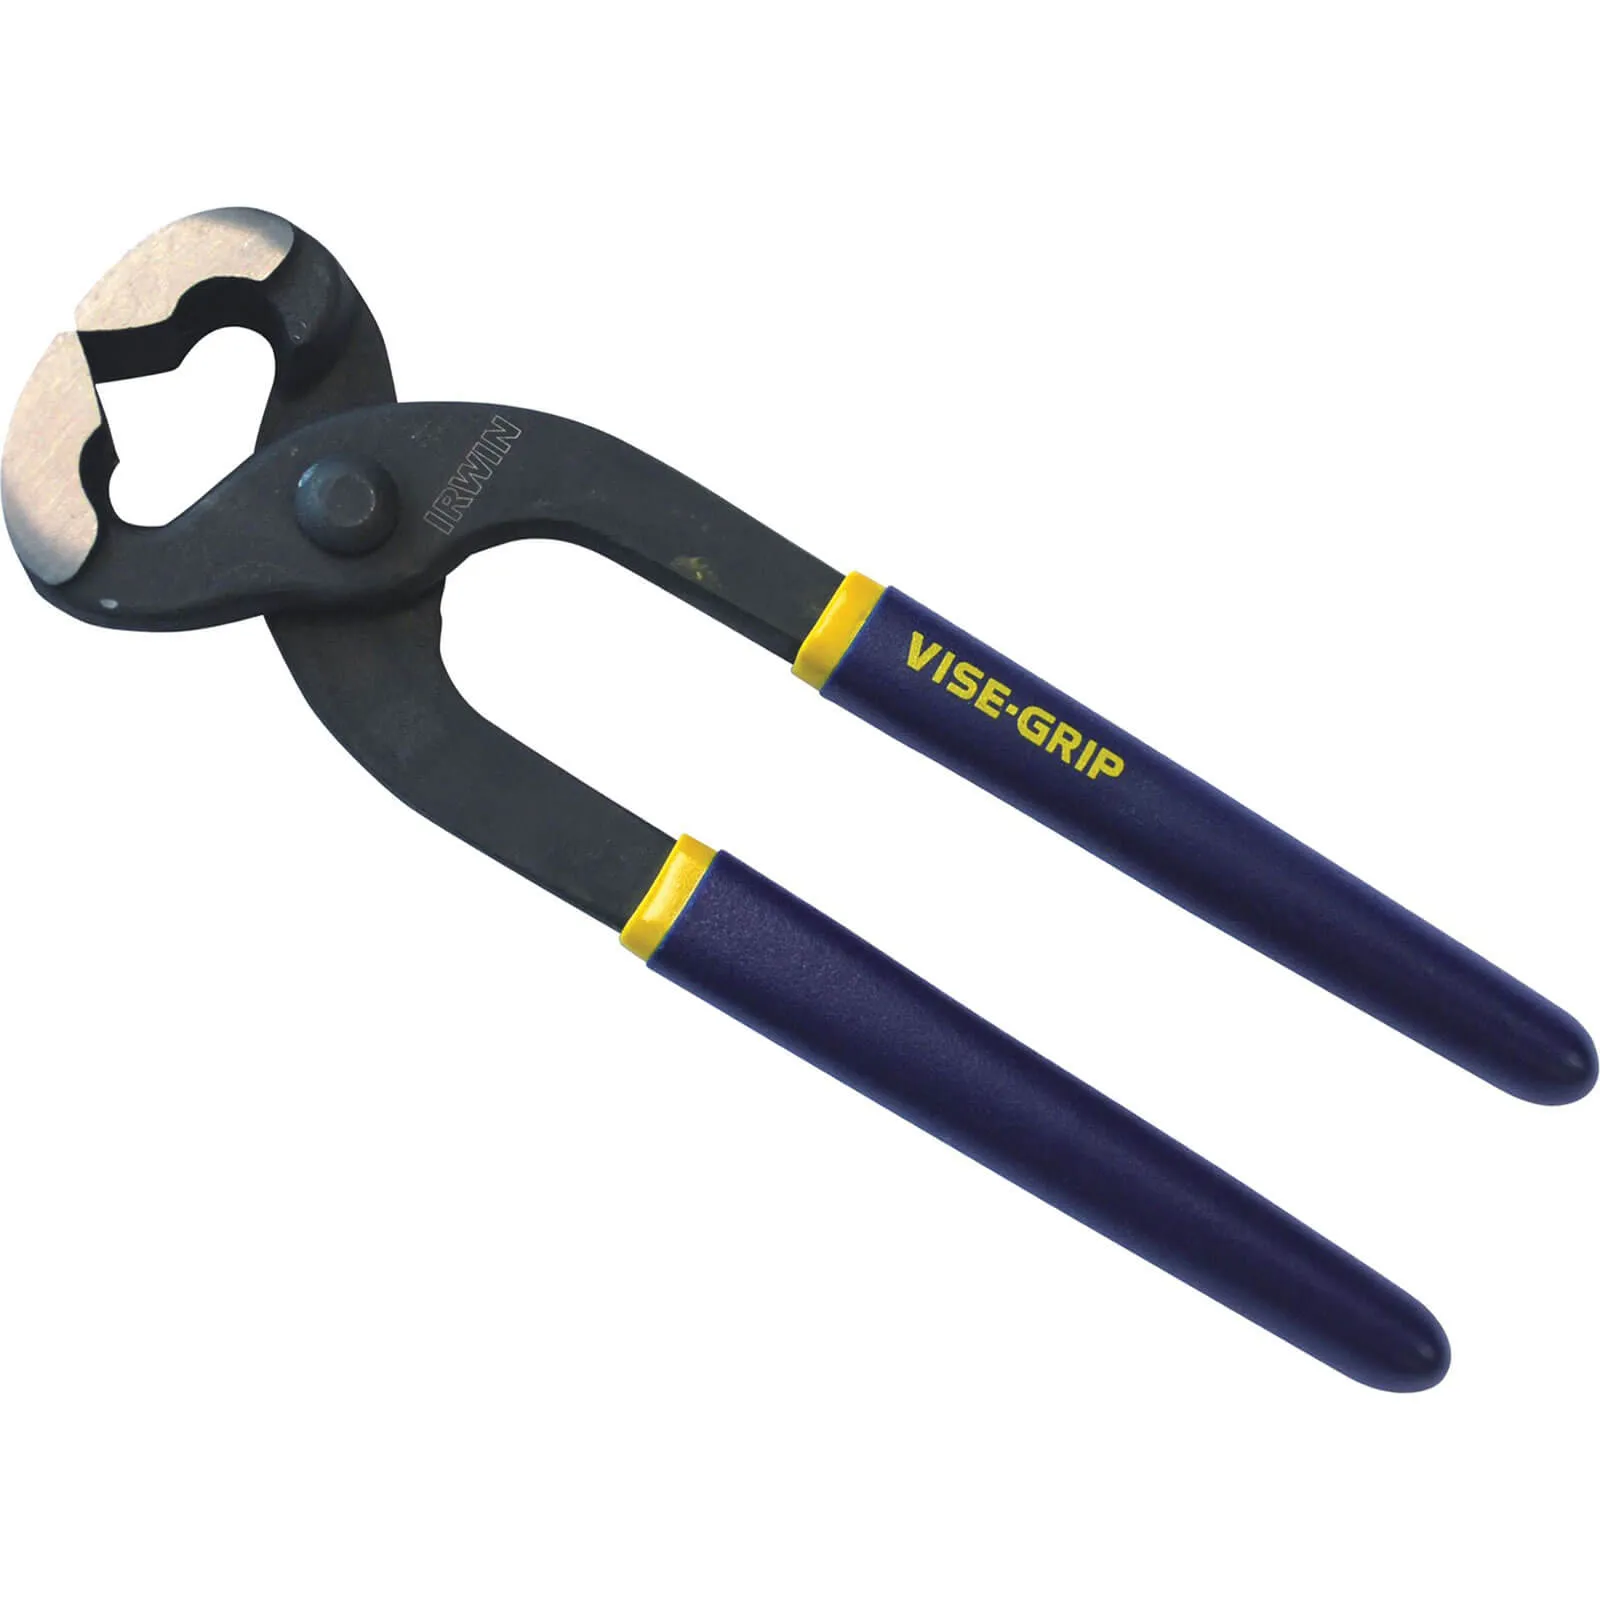 Irwin Vise Grip Nail Puller - 200mm